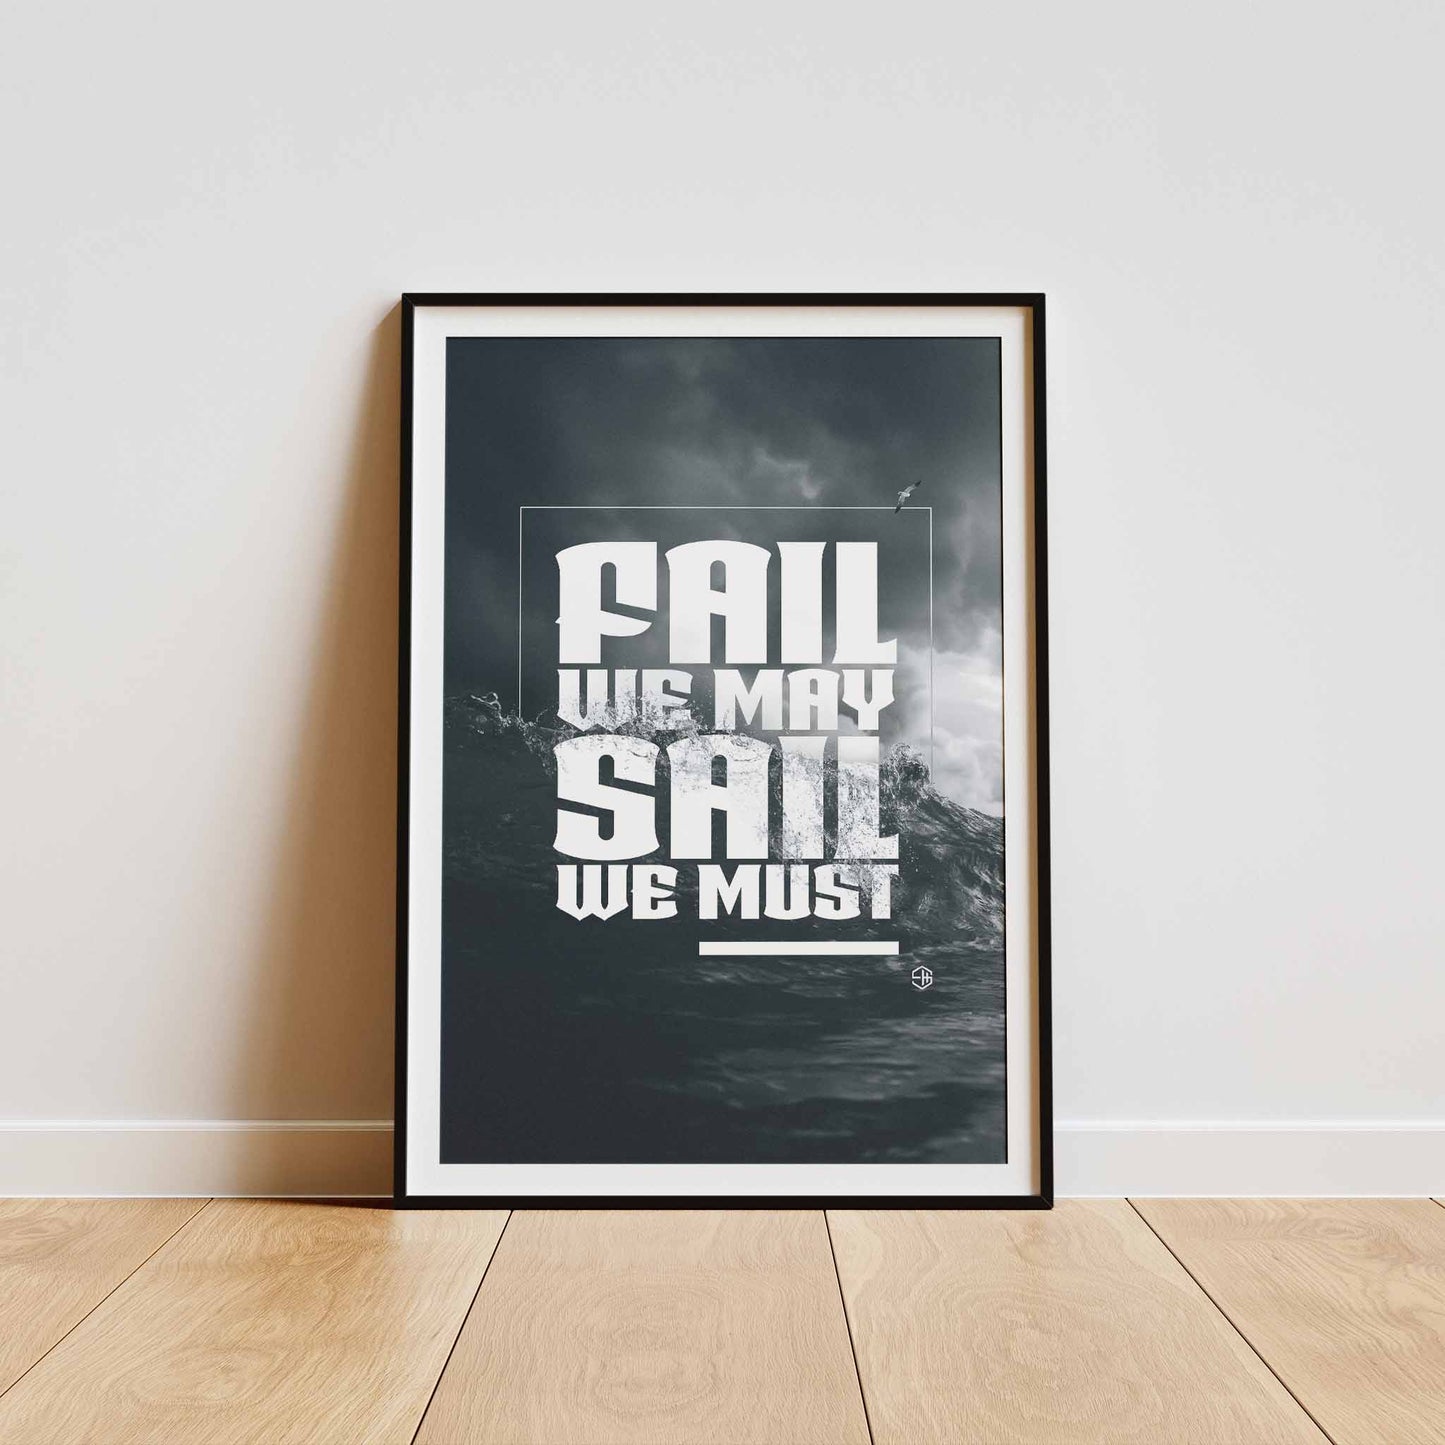 Fail We May, Sail We Must Andrew Weatherall Poster